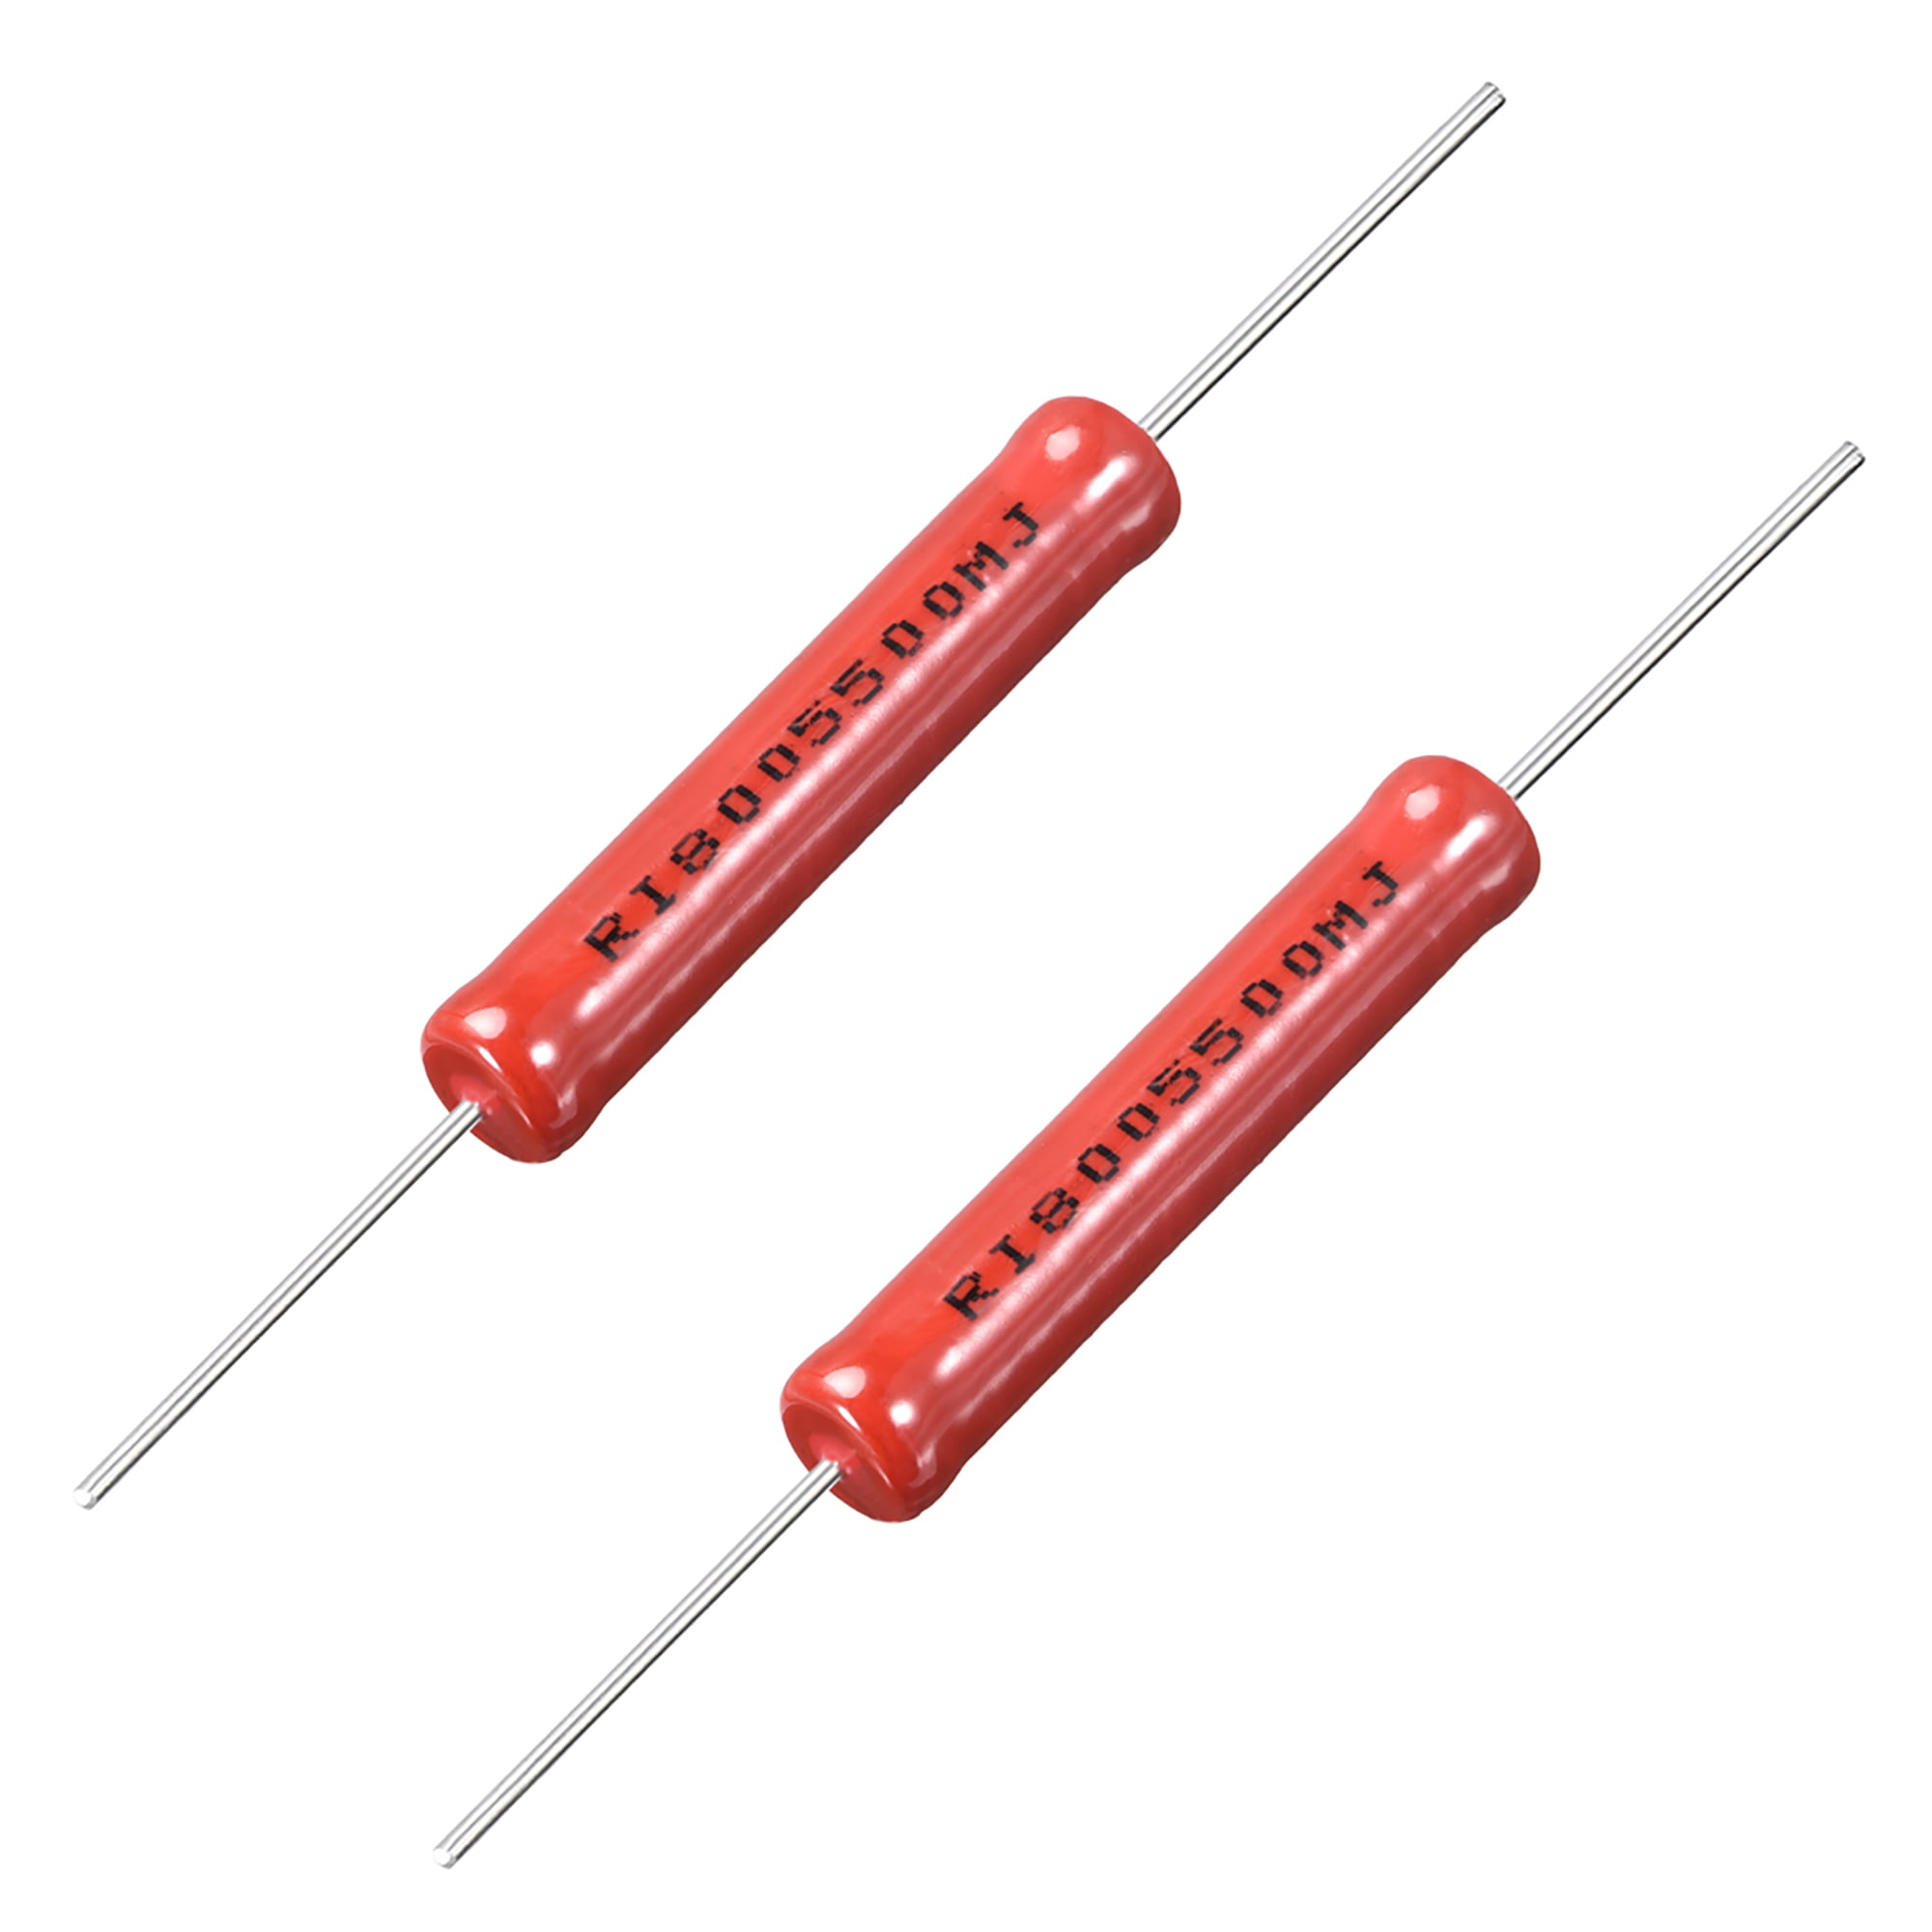 Resistor Power Rating and the Power of Resistors